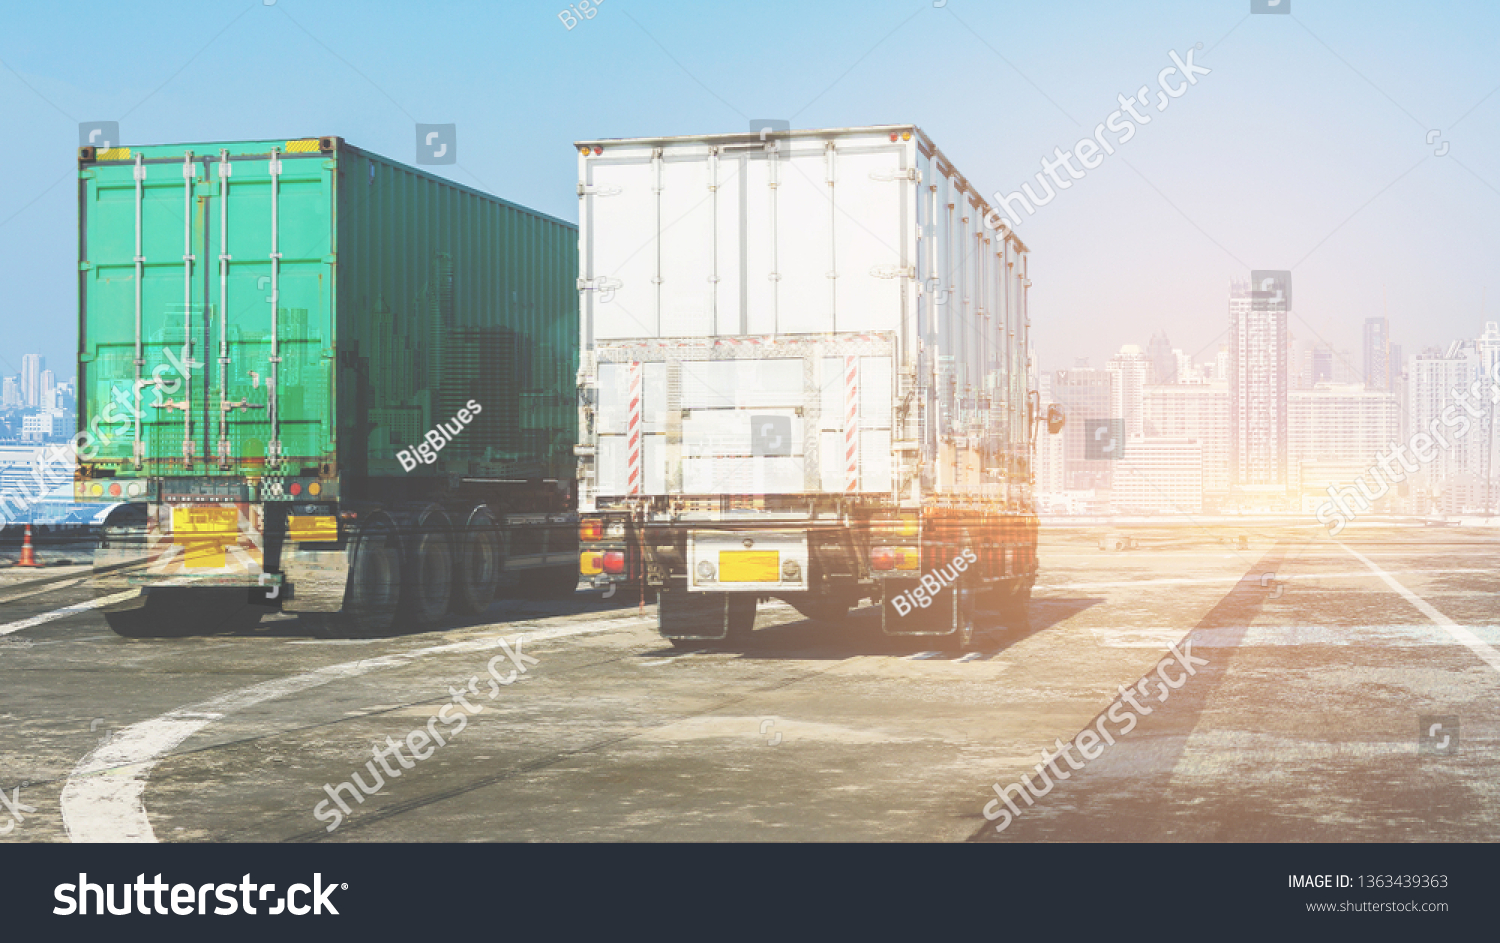 Truck on highway road with container, transportation concept.,import,export logistic industrial Transporting Land transport on the asphalt expressway with blue sky                        #1363439363